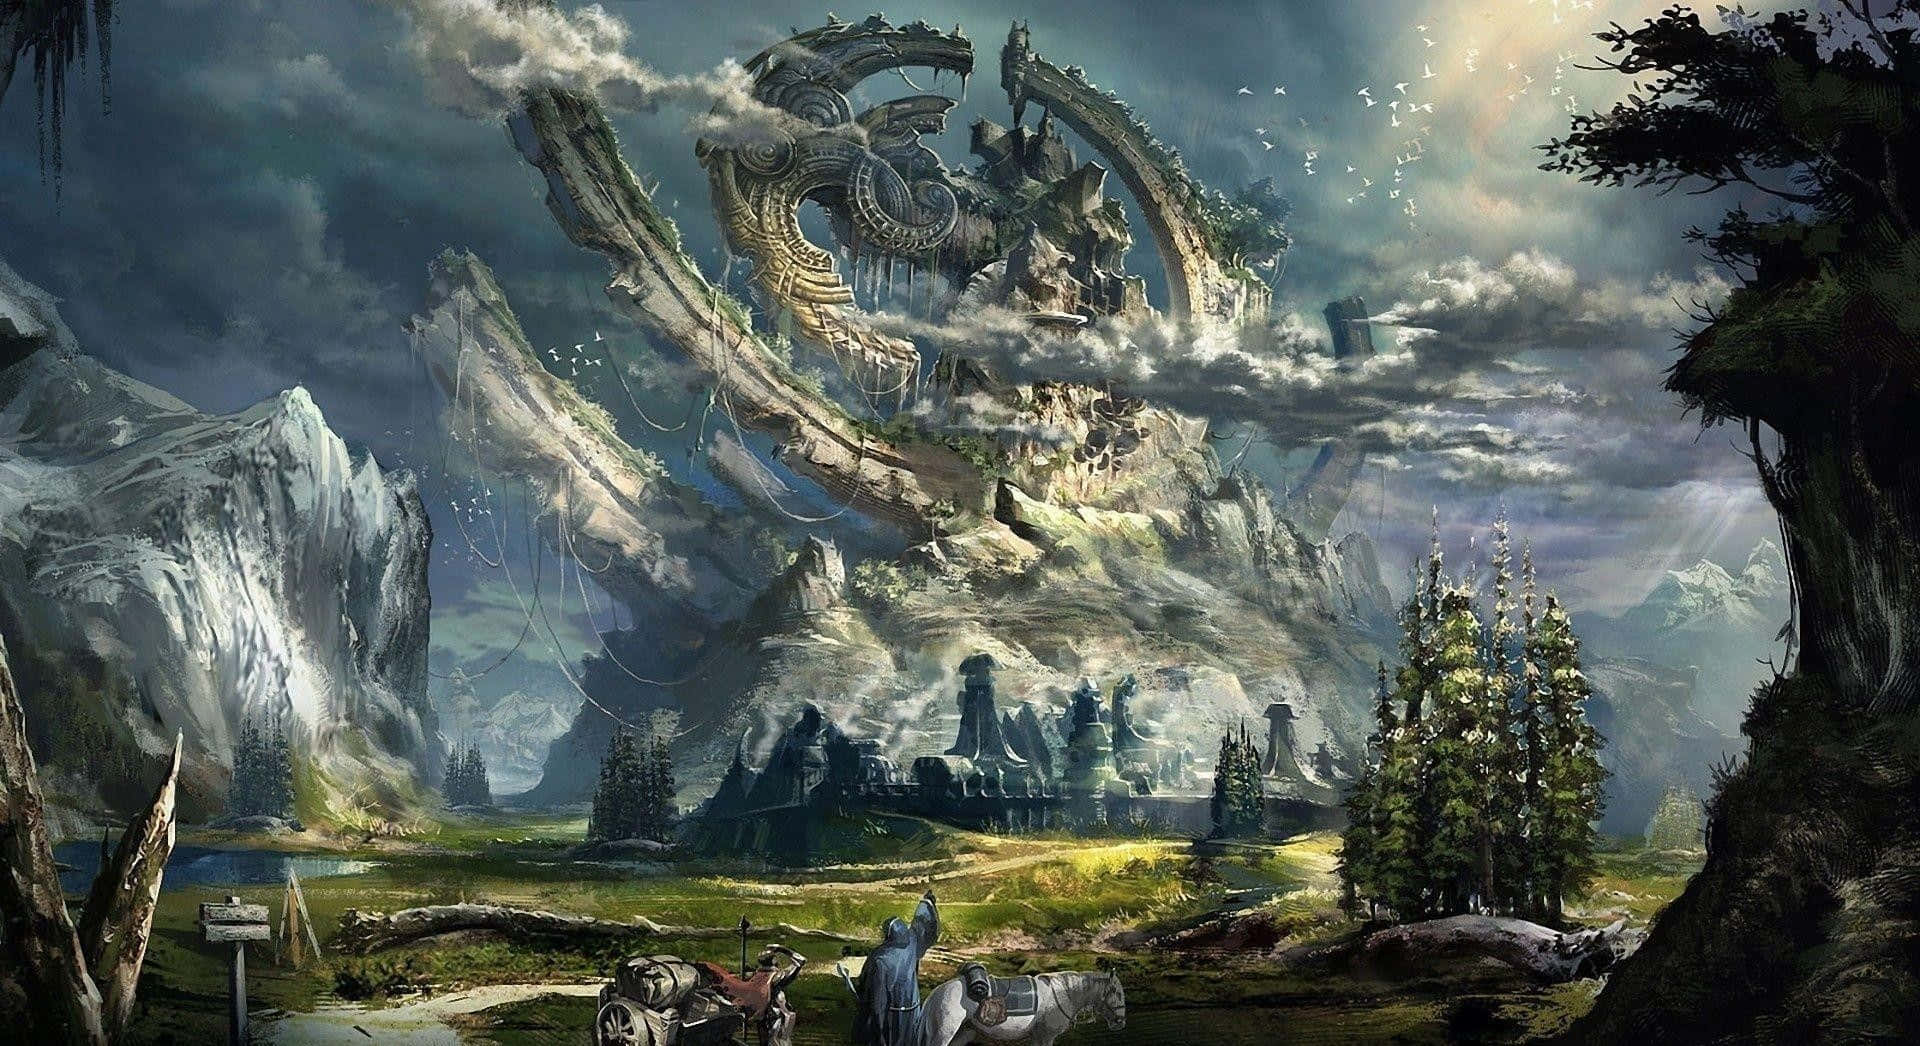 "Discovering the Mystical" Wallpaper